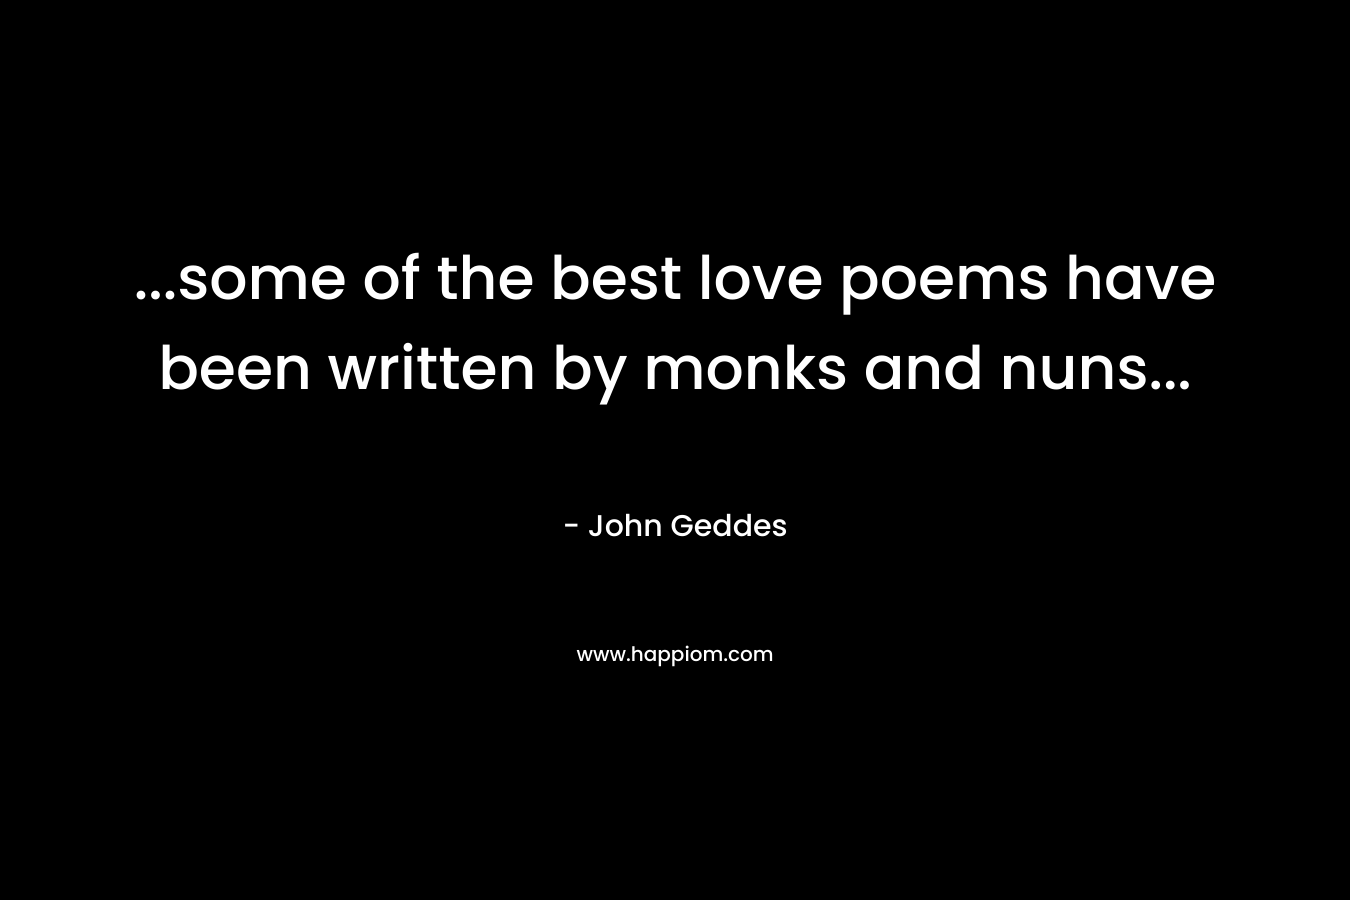 …some of the best love poems have been written by monks and nuns… – John Geddes